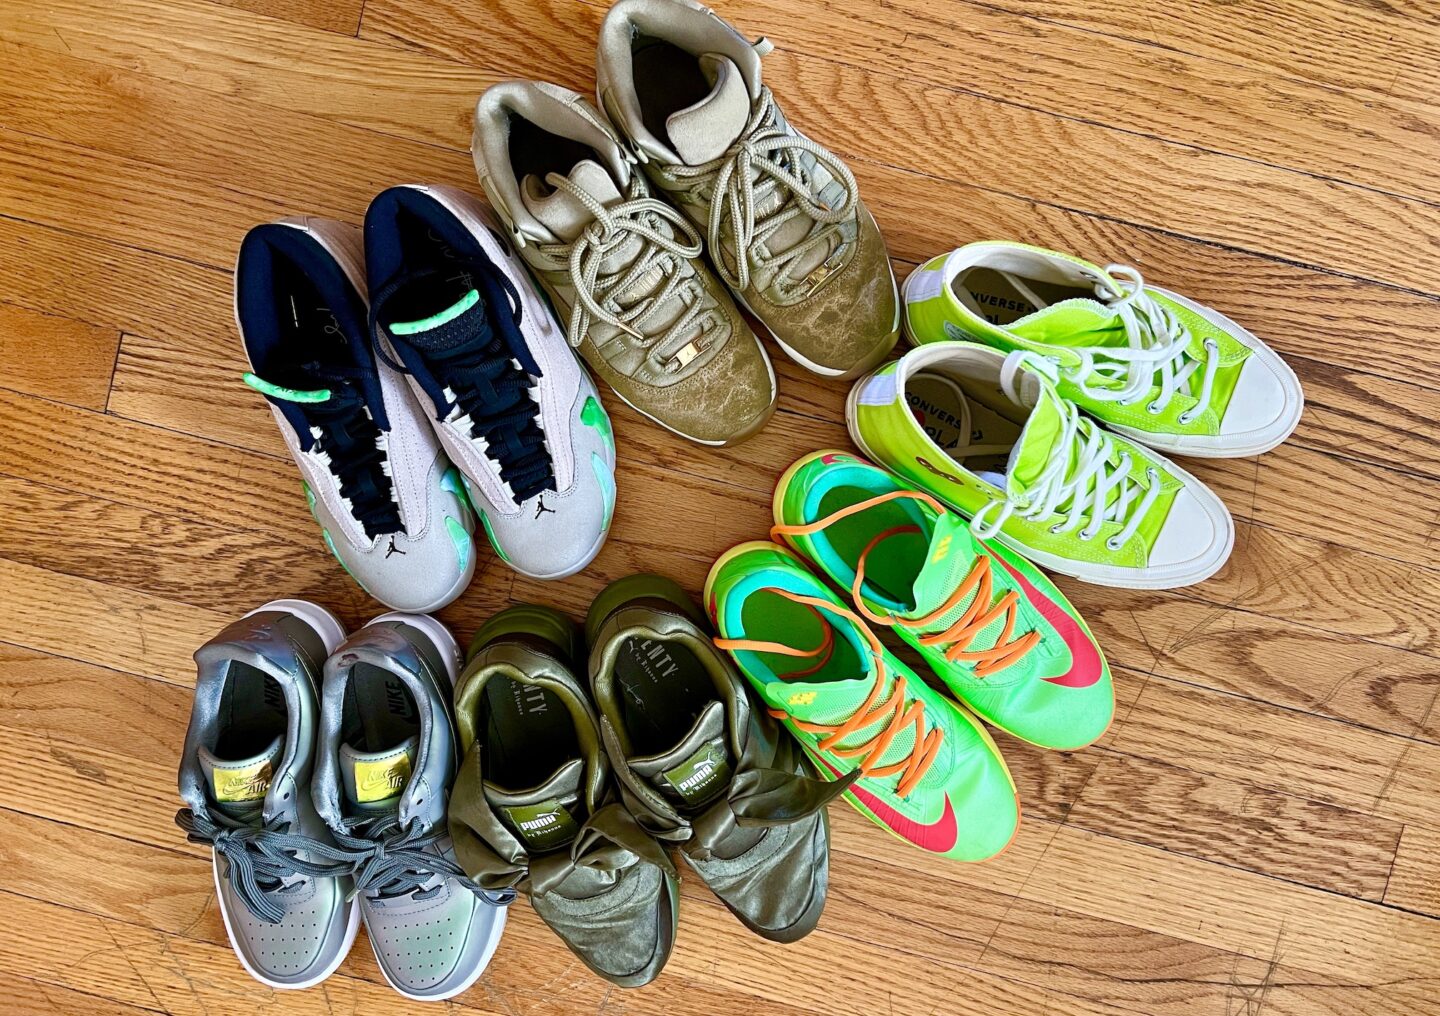 Ways To Style Sneakers For St. Patrick’s Day